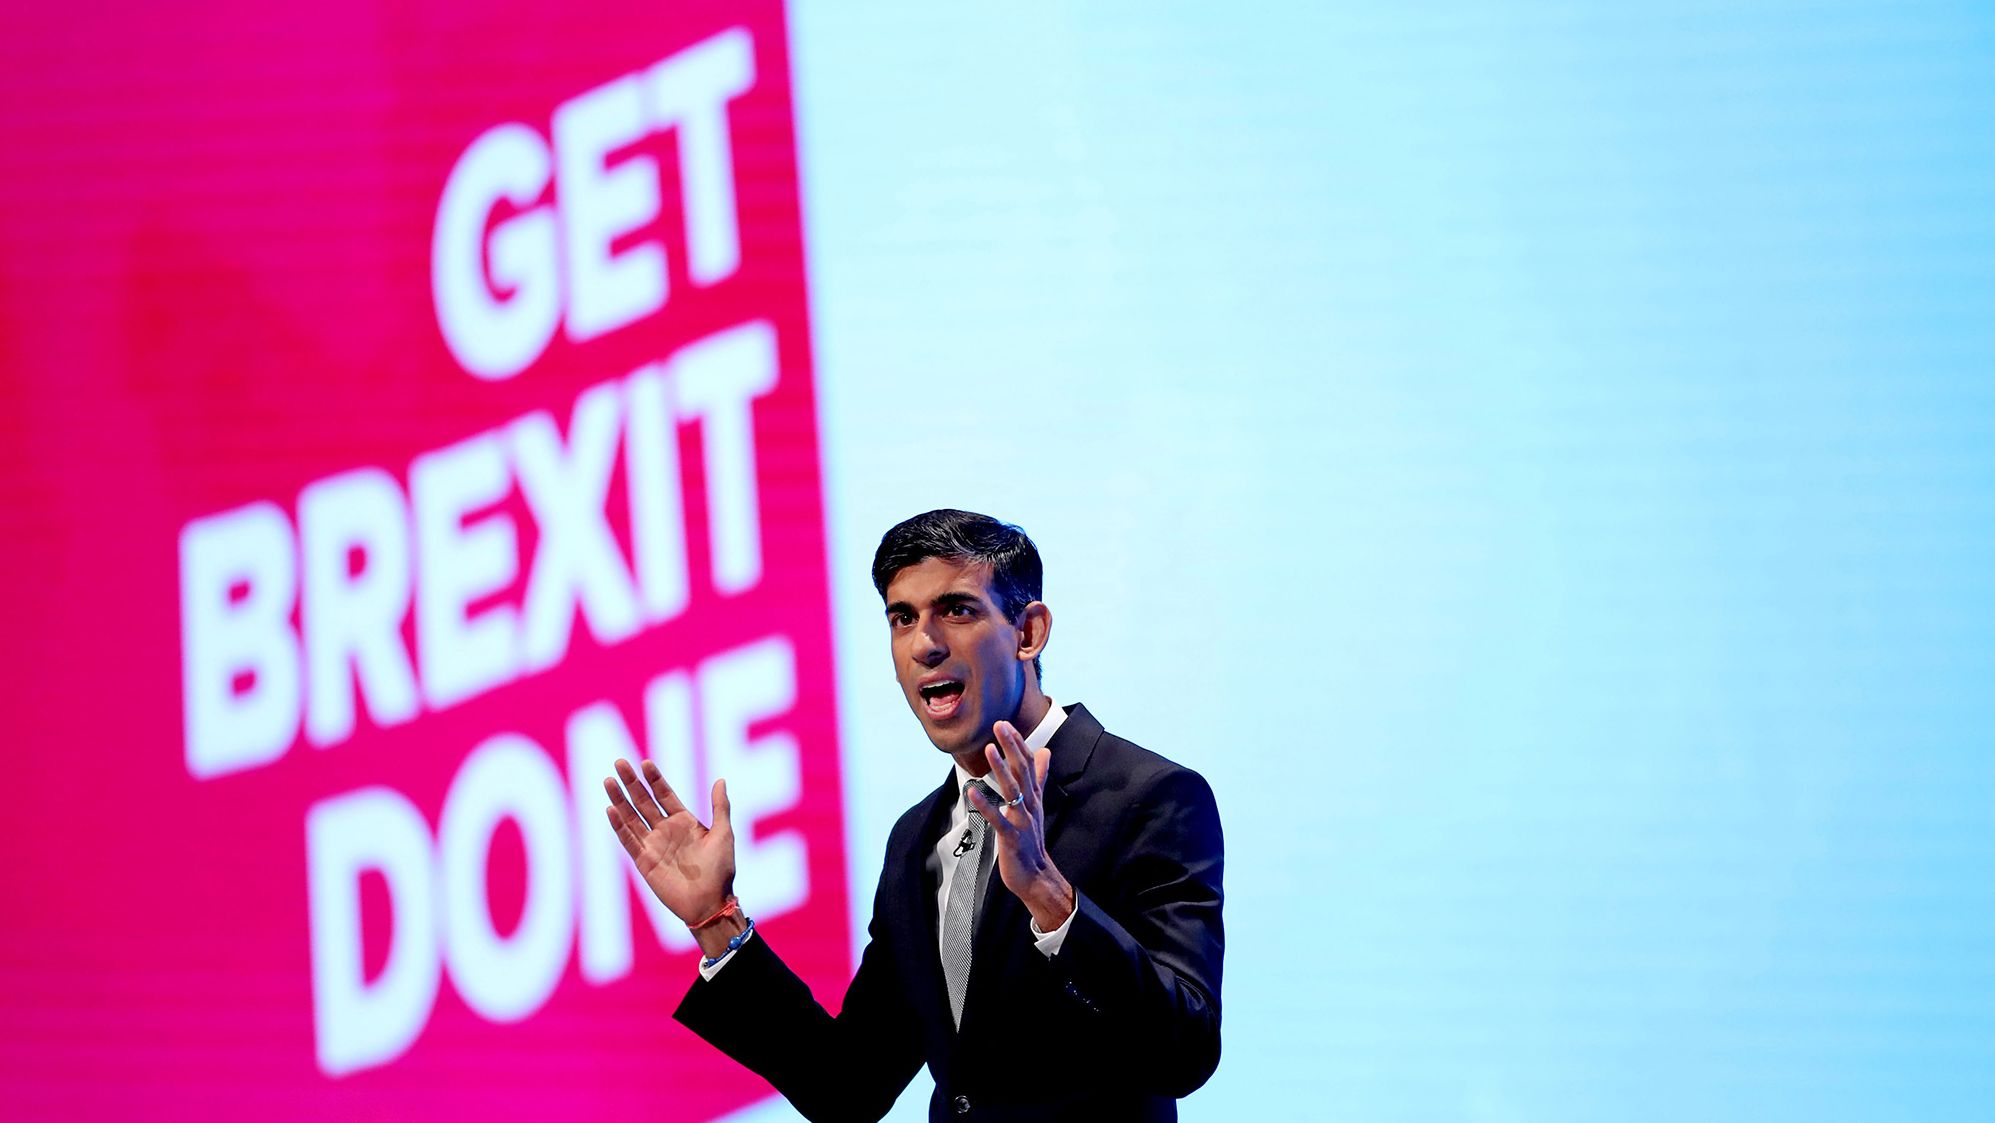 Sunak speaks in front of the words "Get Brexit Done" at the Conservative Party Conference in Manchester, England, in September 2019. He voted for the UK to leave the European Union in the 2016 referendum.